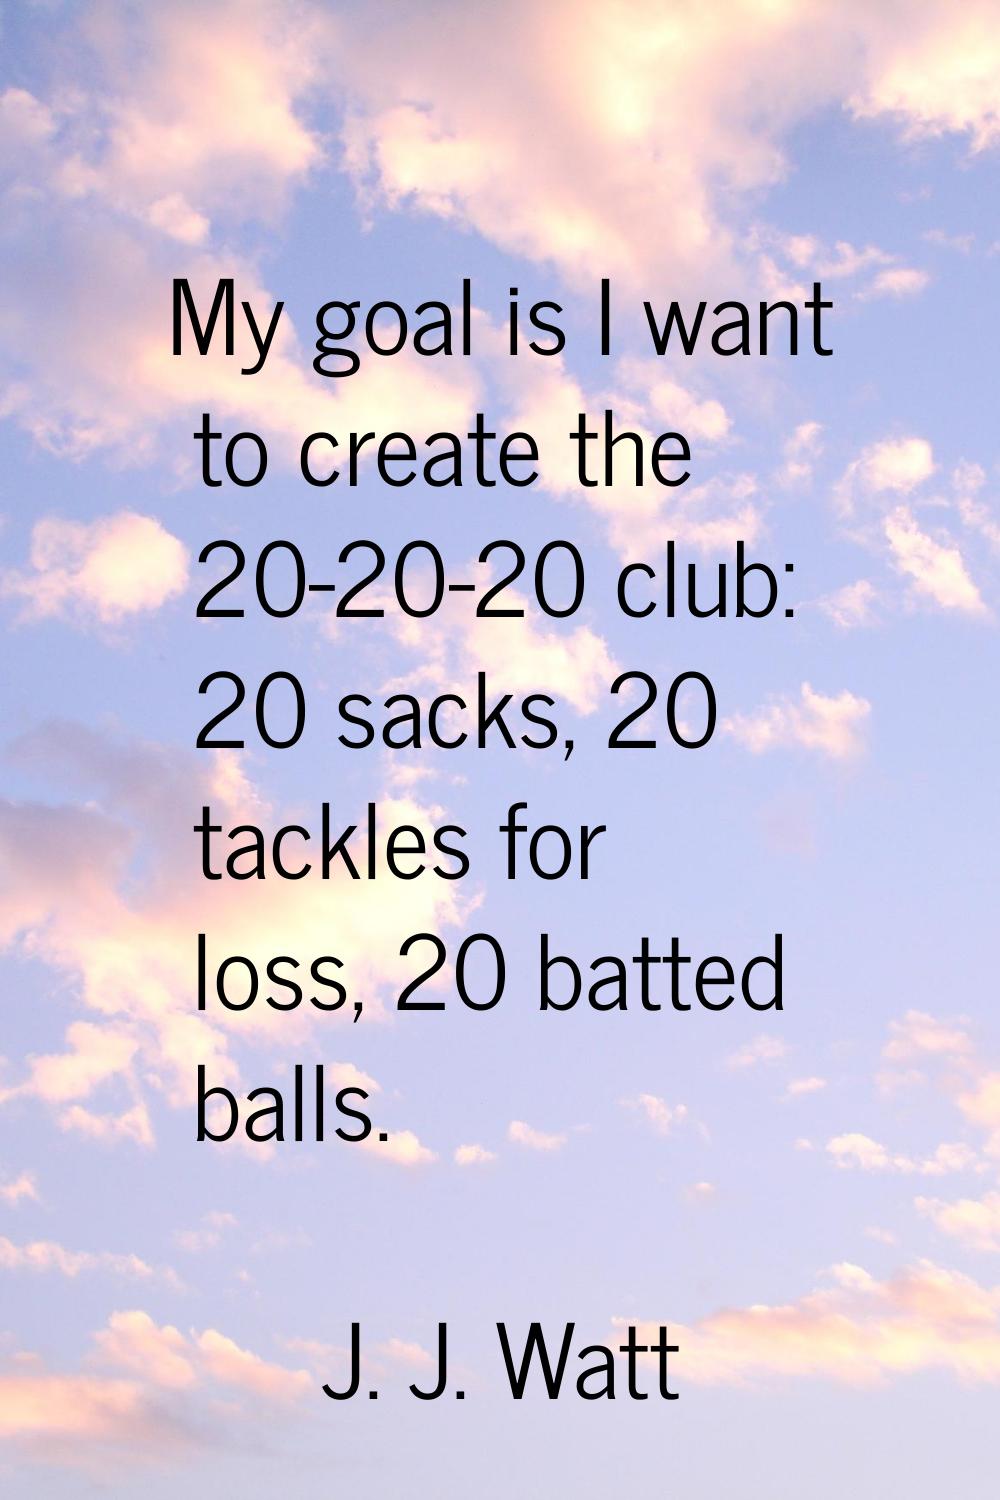 My goal is I want to create the 20-20-20 club: 20 sacks, 20 tackles for loss, 20 batted balls.